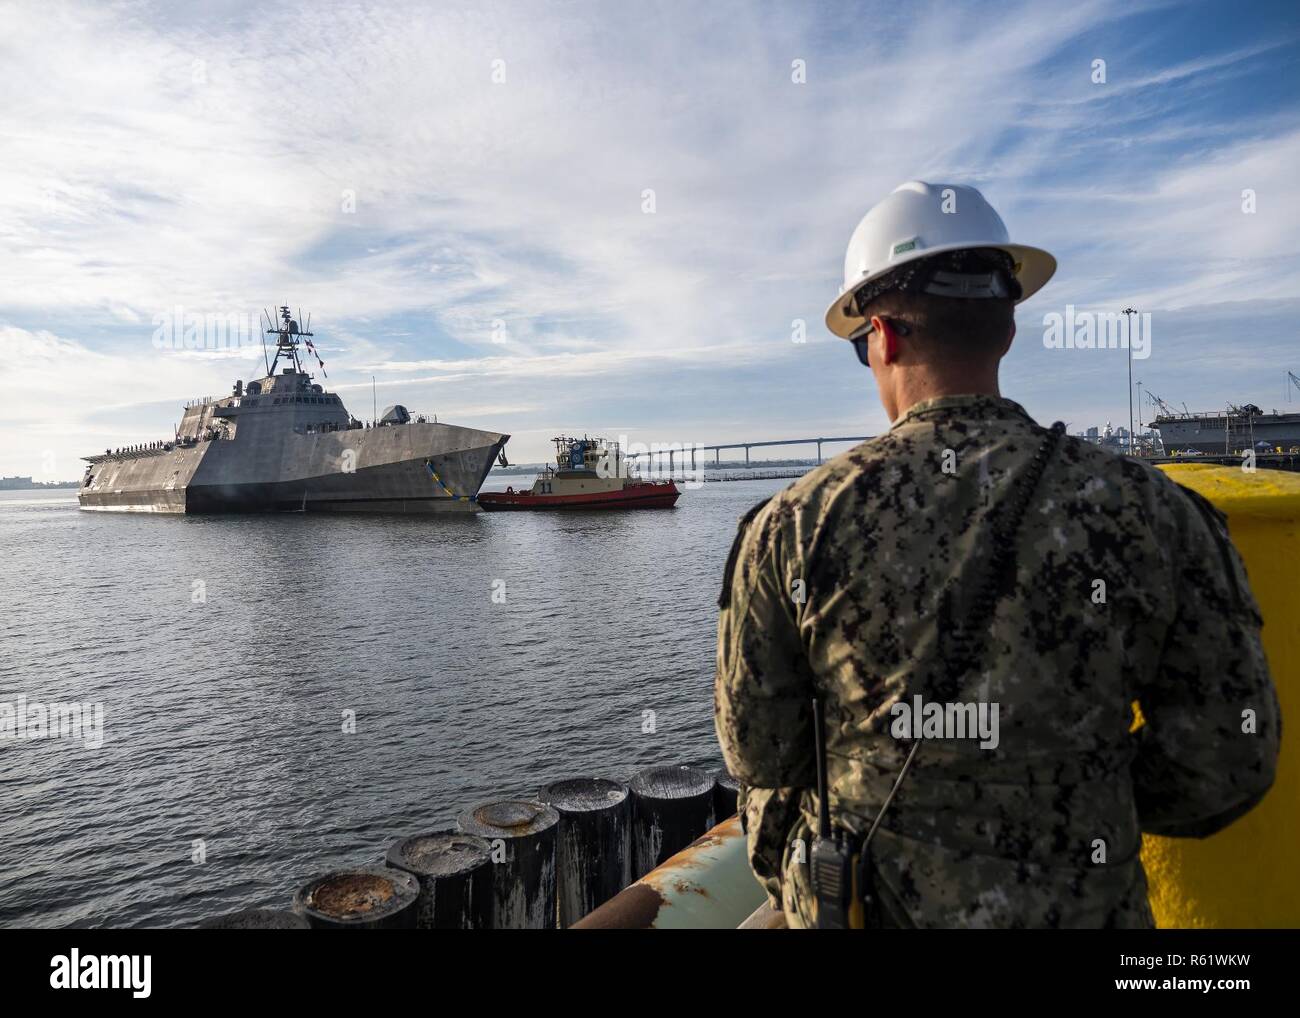 SAN DIEGO (Nov. 21, 2018) The future USS Tulsa (LCS 16) arrives at its new homeport, Naval Base San Diego, after completing its maiden voyage from the Austal USA shipyard in Mobile, Alabama. Tulsa is the eighth ship in the littoral combat ship Independence-variant class and is scheduled for commissioning Feb. 16, 2019 in San Francisco. Stock Photo